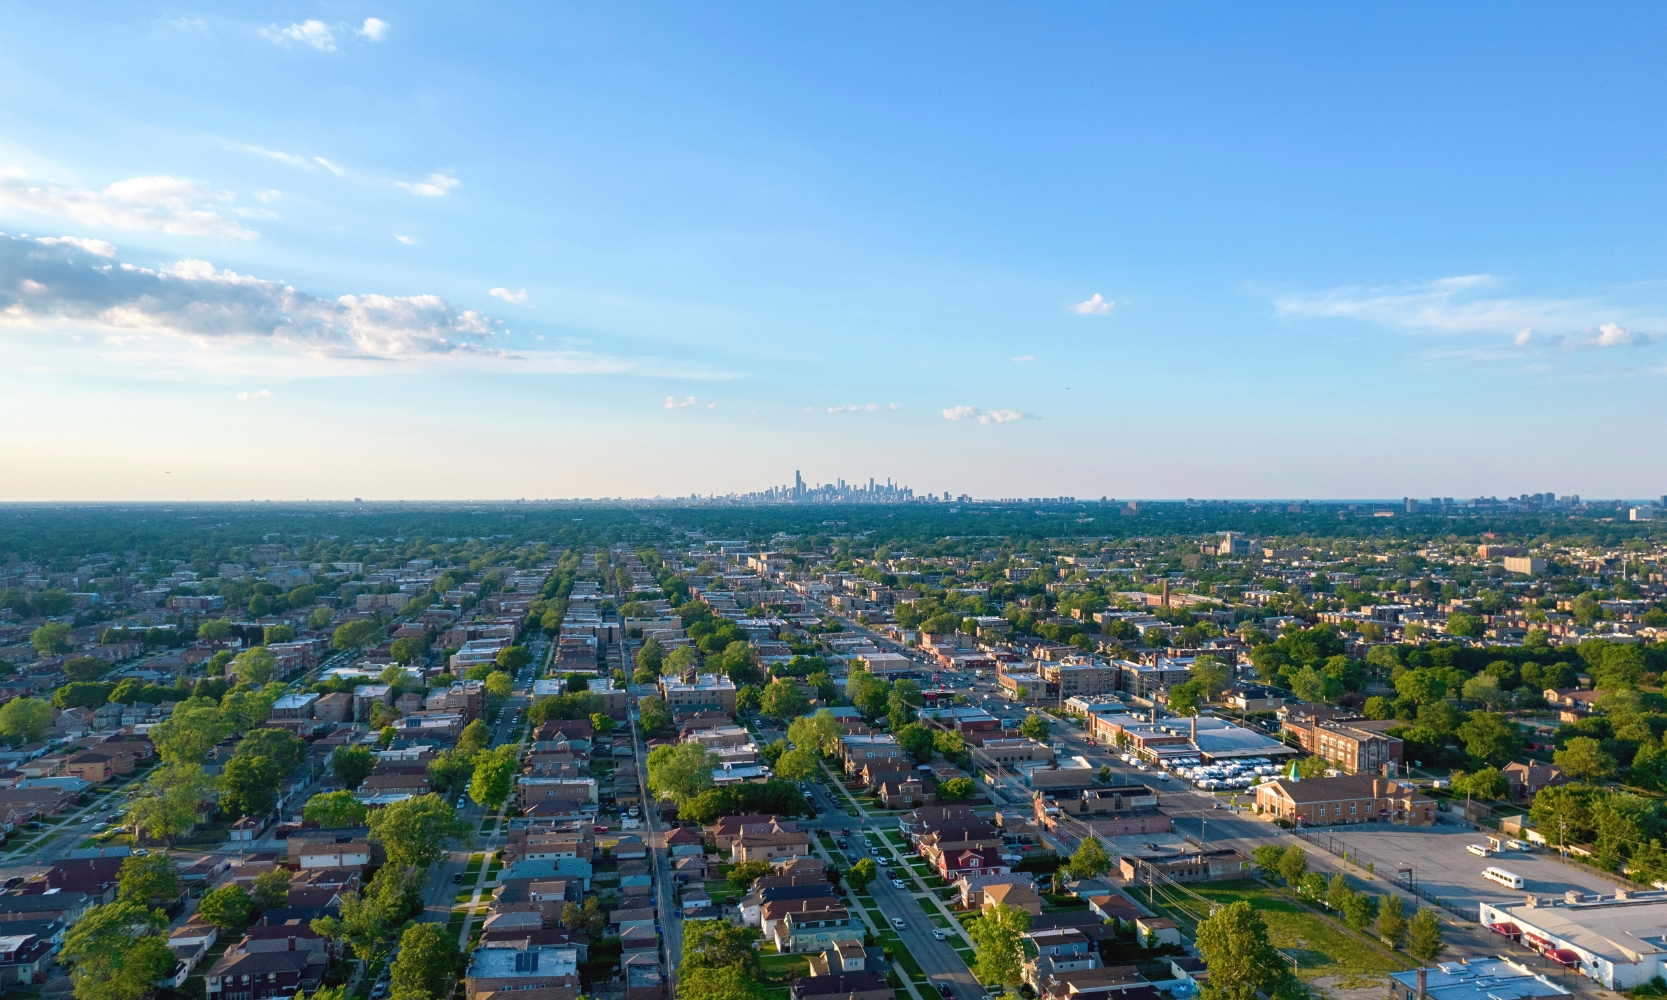 An aerial view image of the Chicago skyline from South Shore neighborhoods